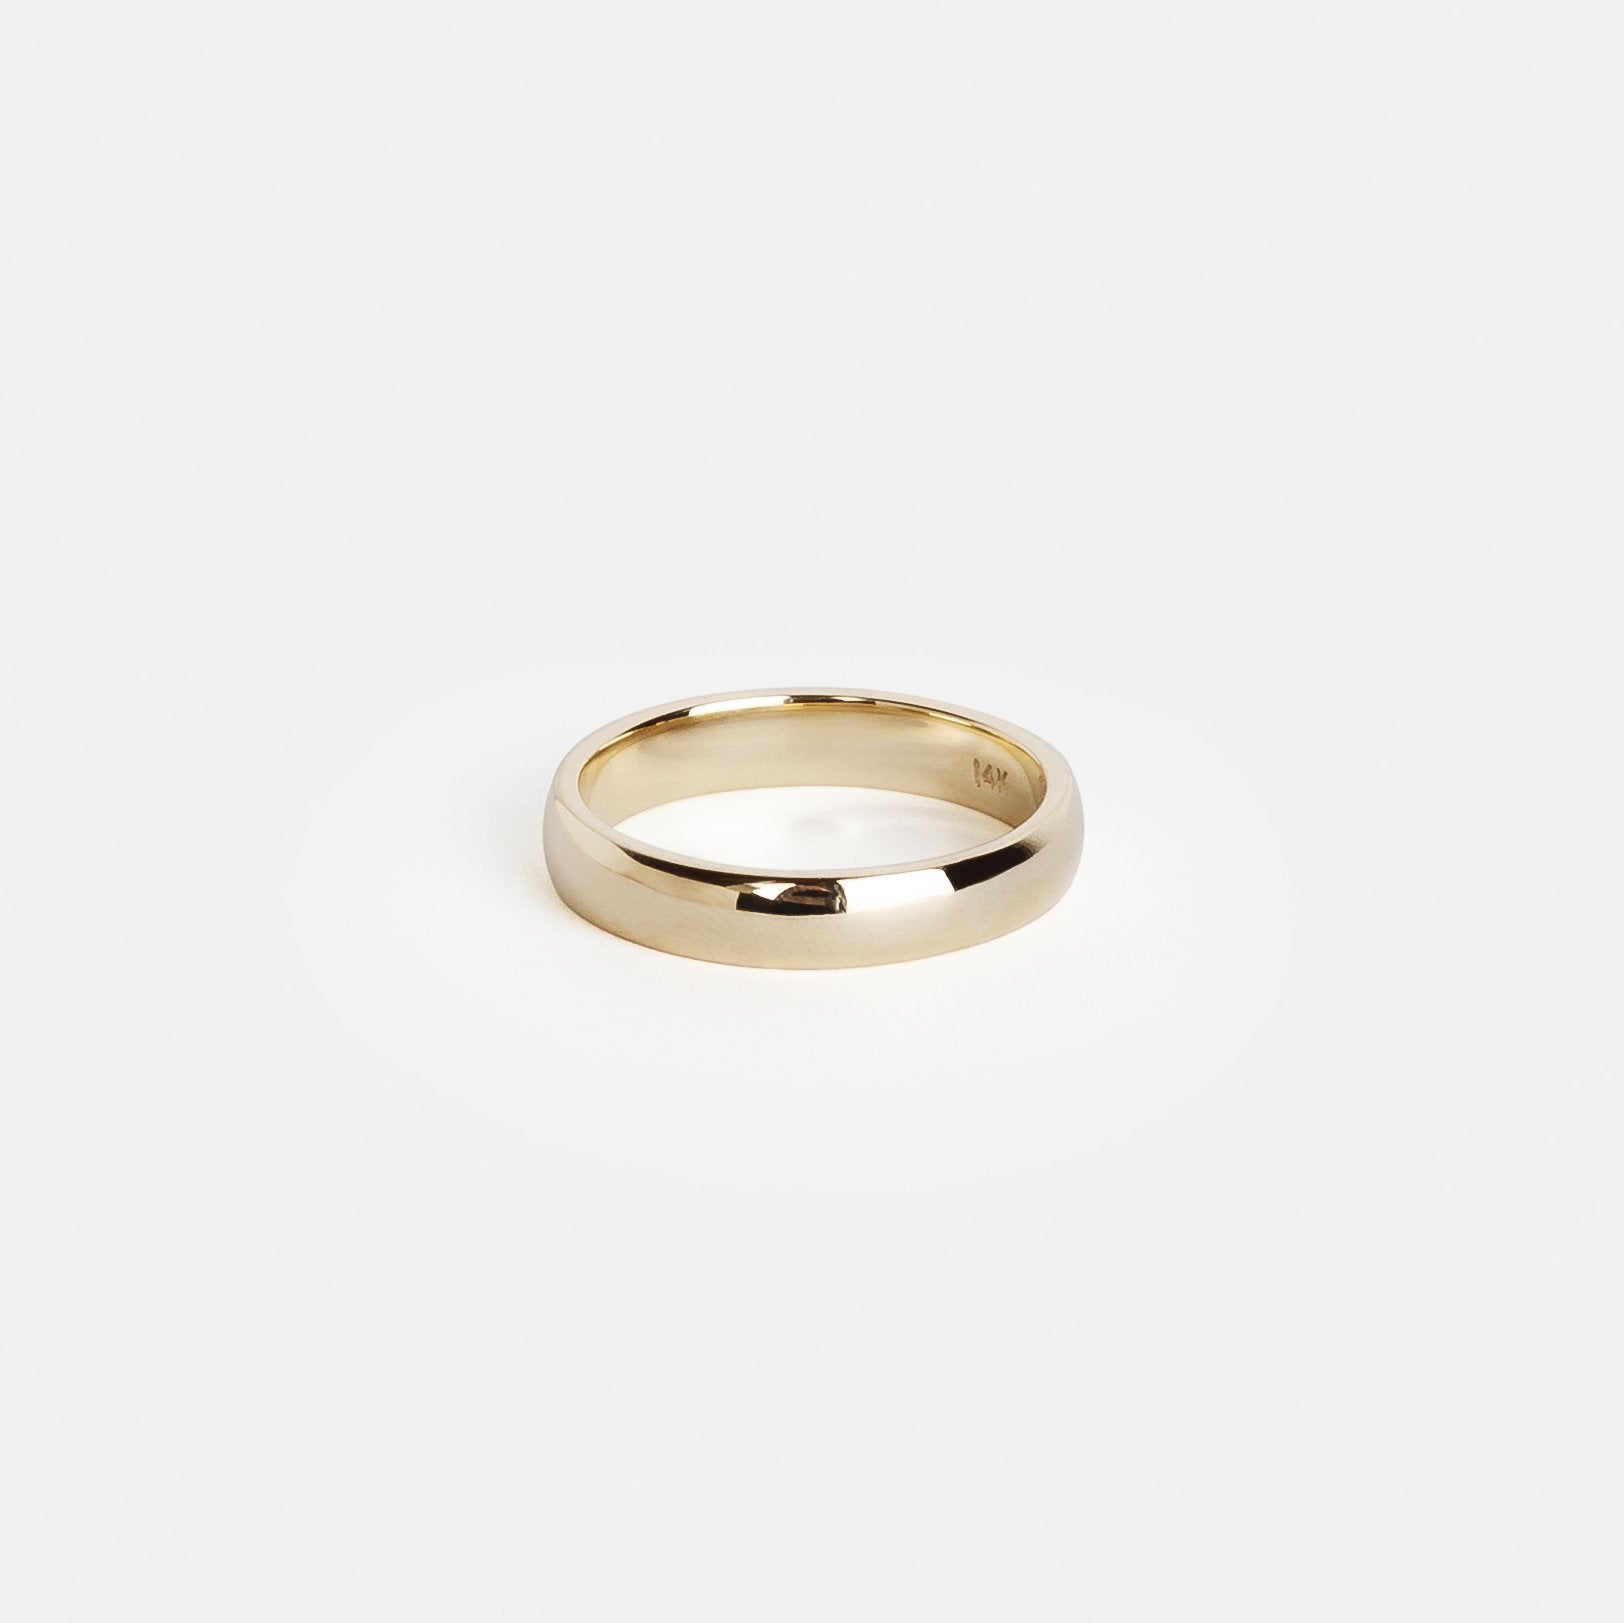 4mm Domed Plain Band in 14k Gold By SHW Fine Jewelry NYC